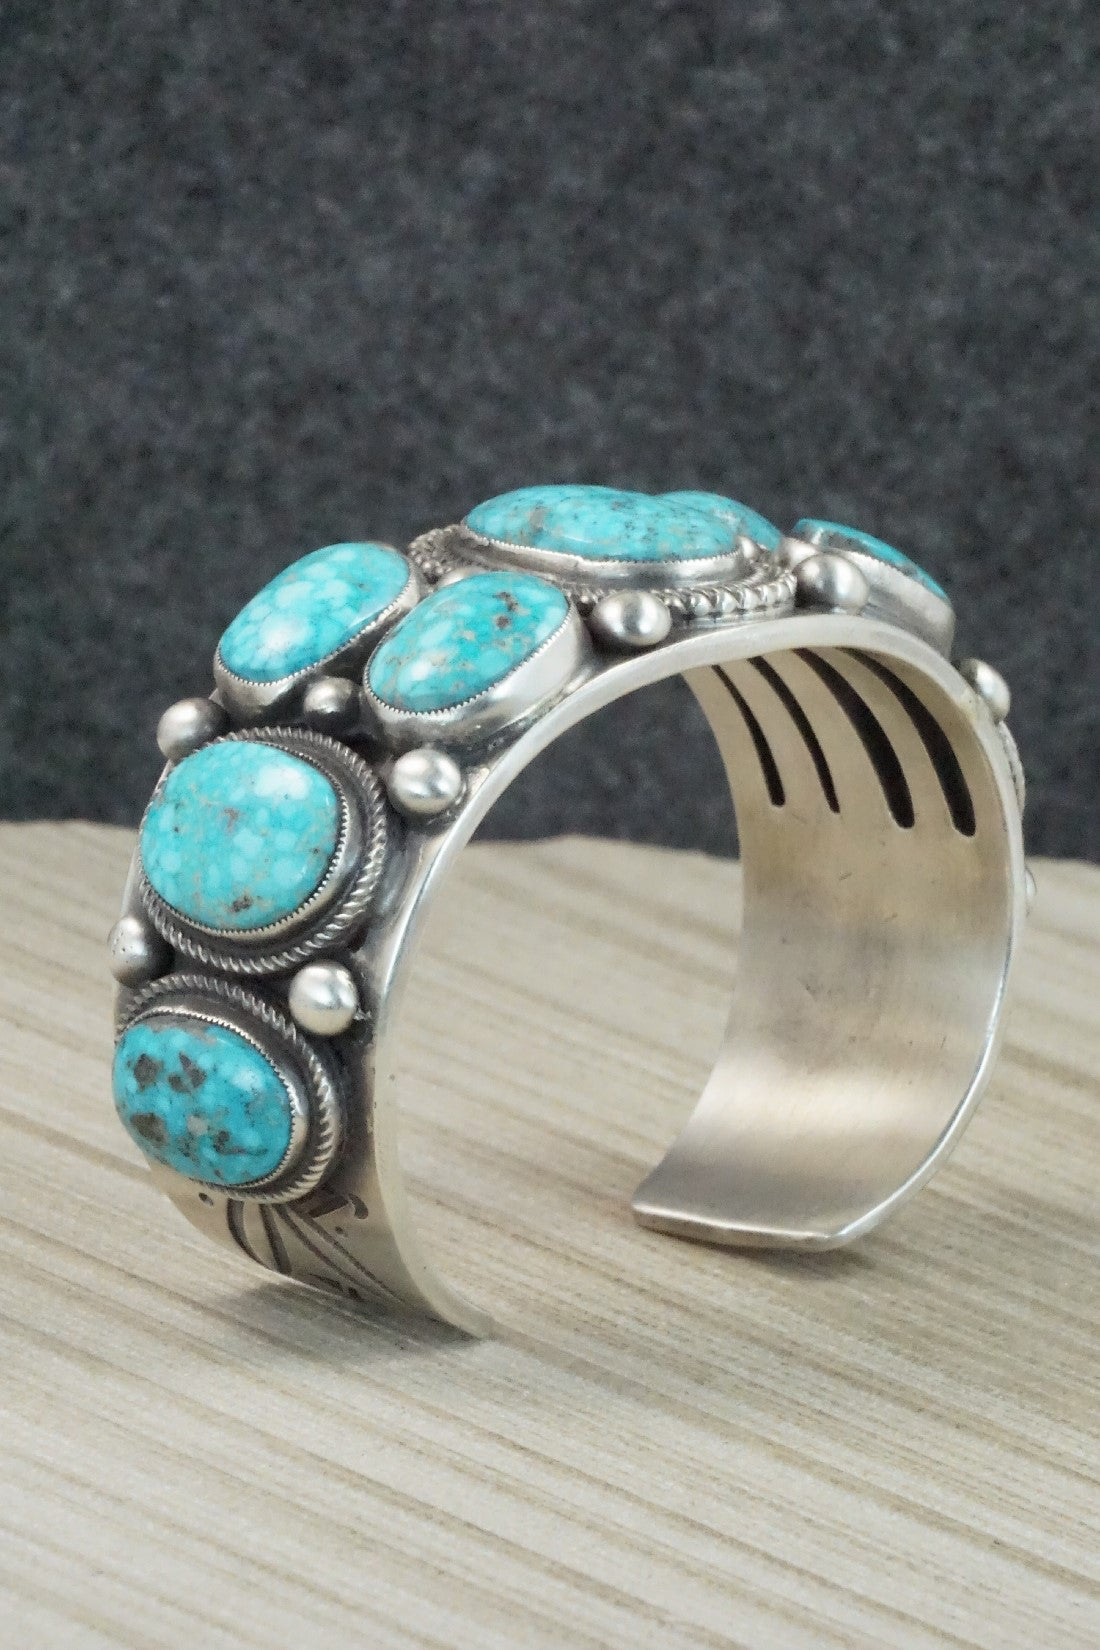 Turquoise and Sterling Silver Bracelet - Calvin Martinez